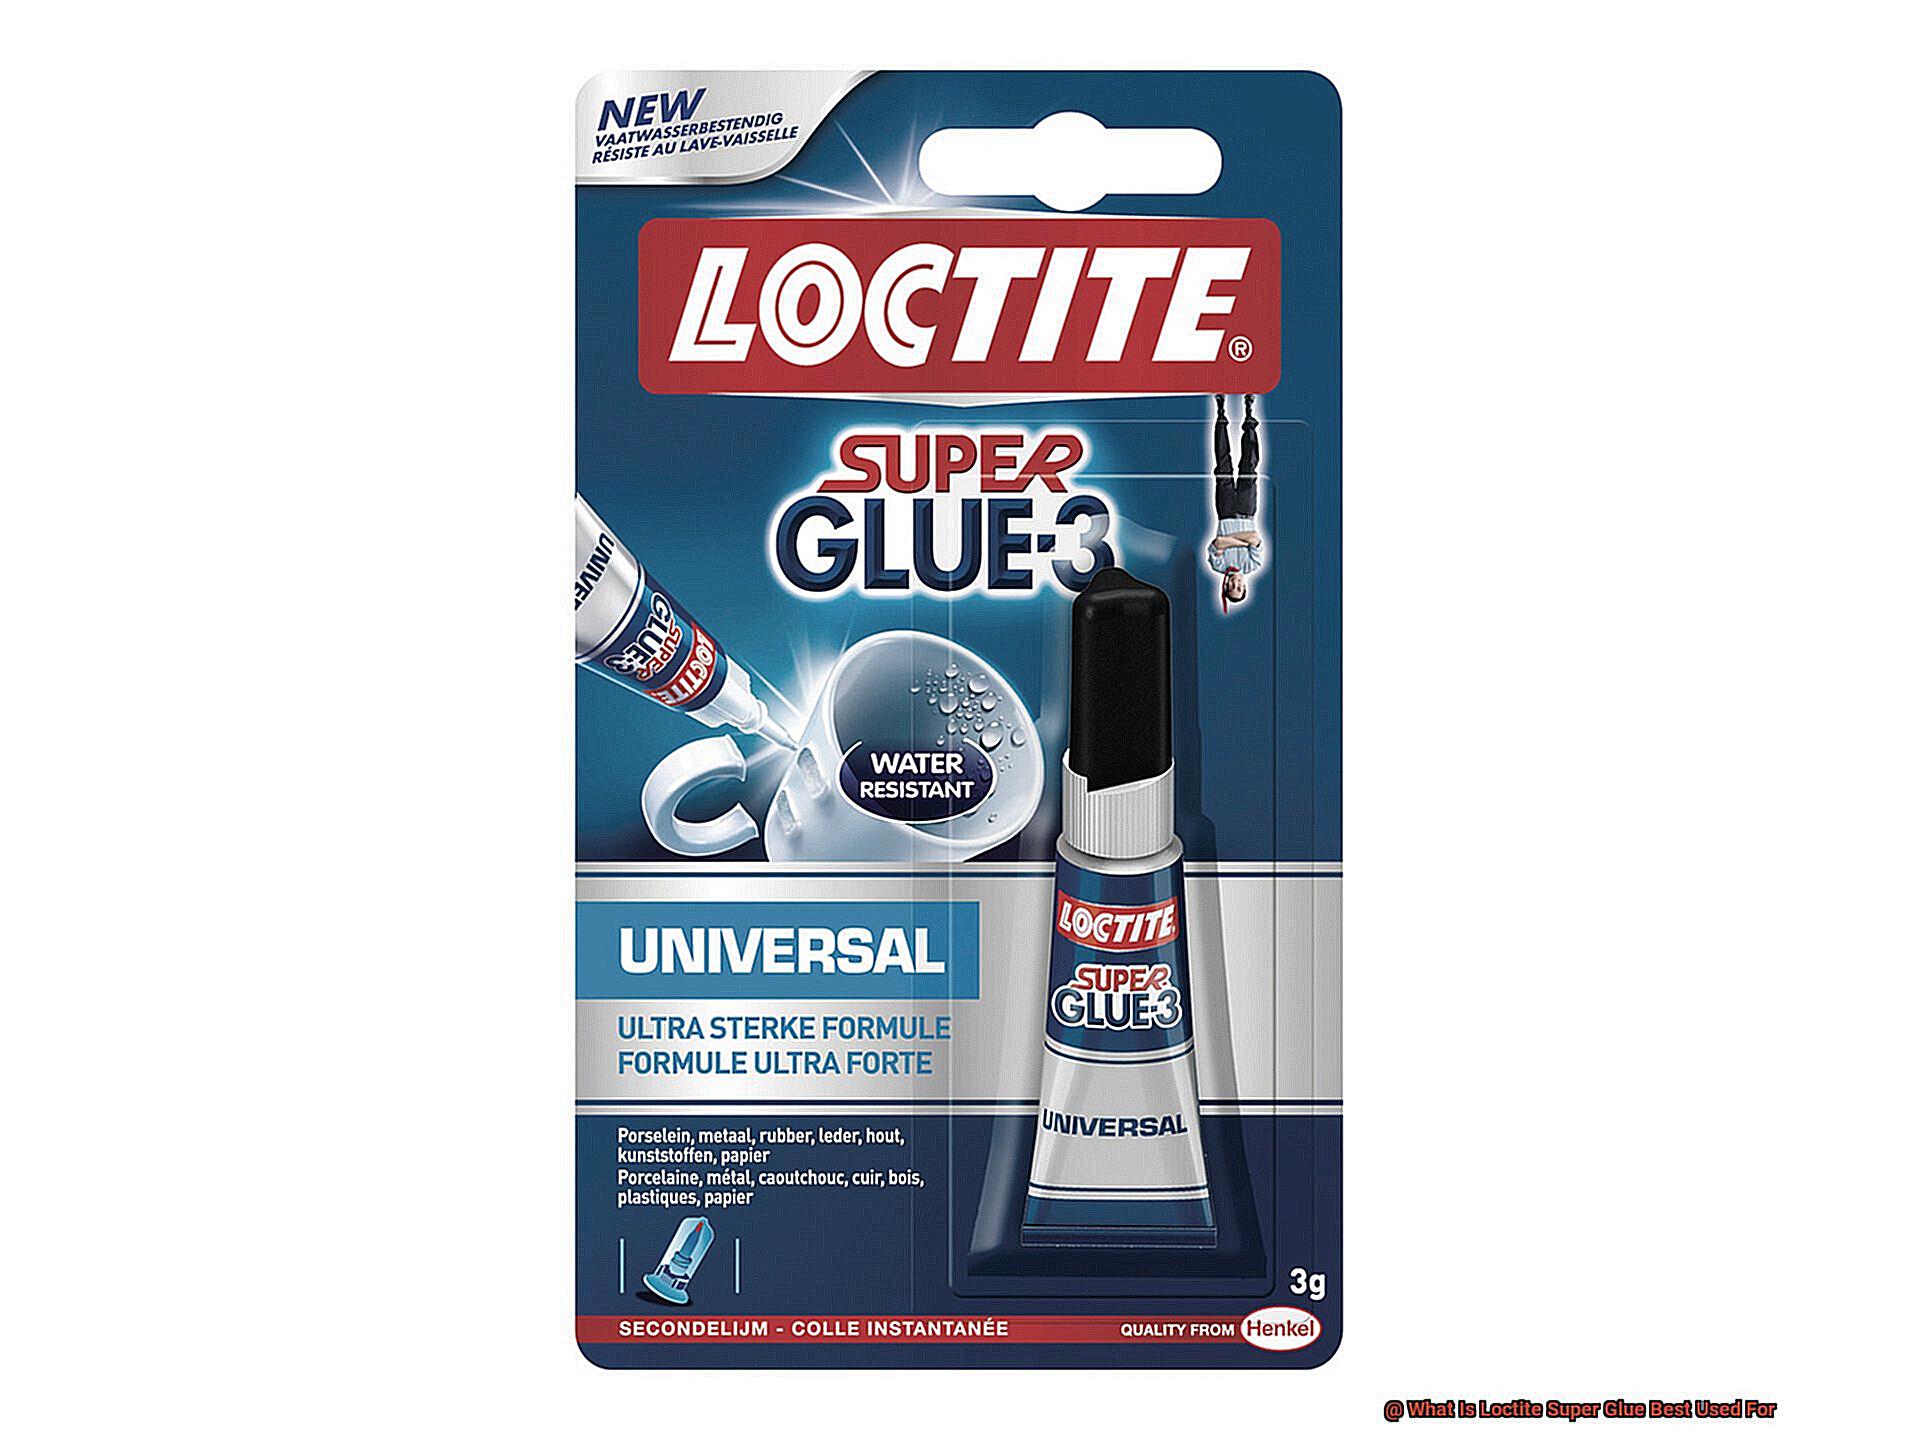 What Is Loctite Super Glue Best Used For-2